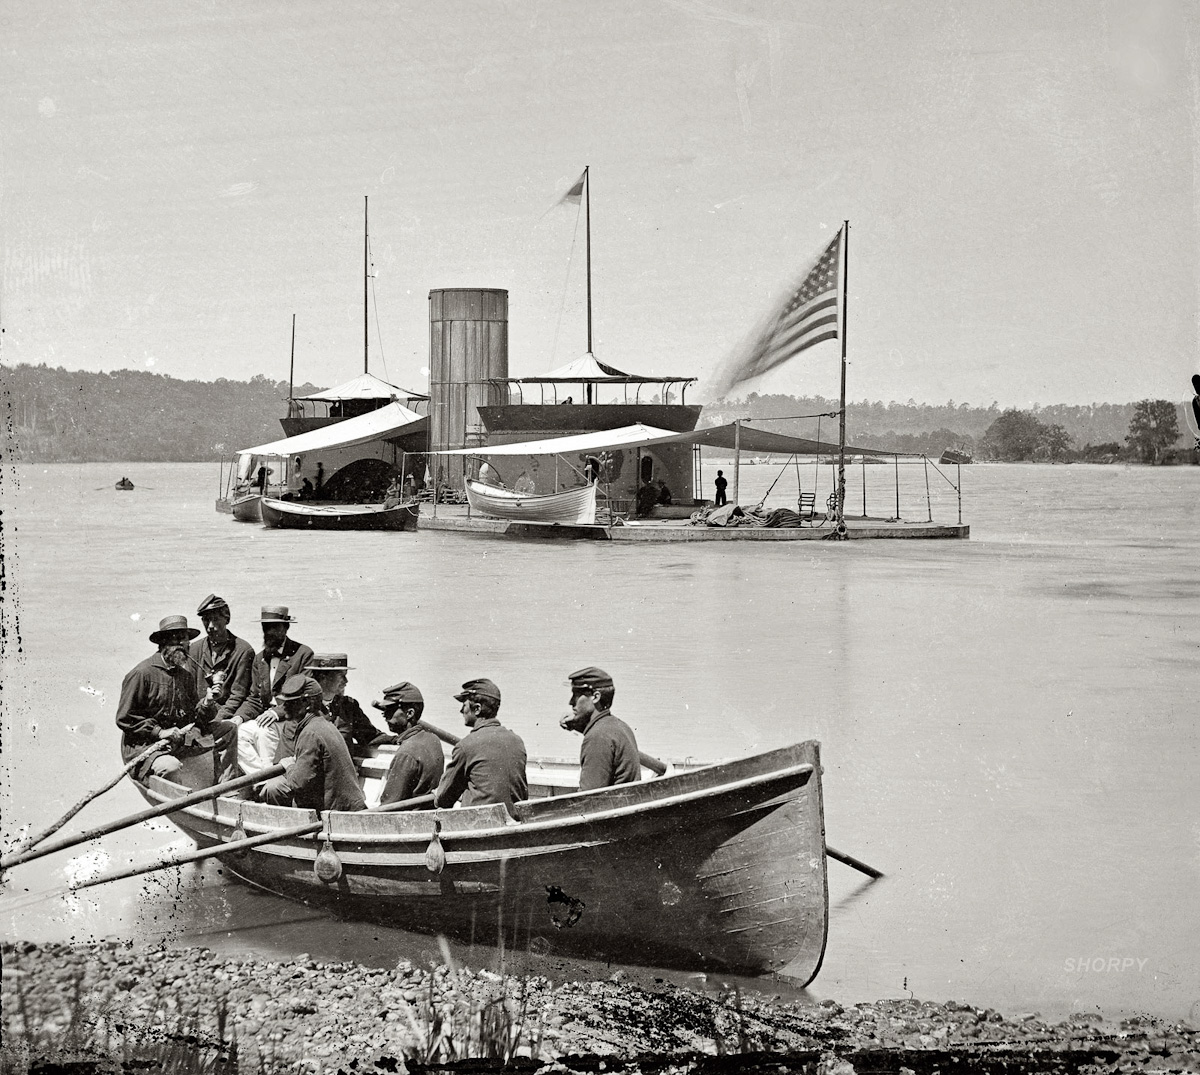 003  1864  " James River , Virginia . Double-turreted monitor U.S.S. Onondaga, soldiers in rowboat"